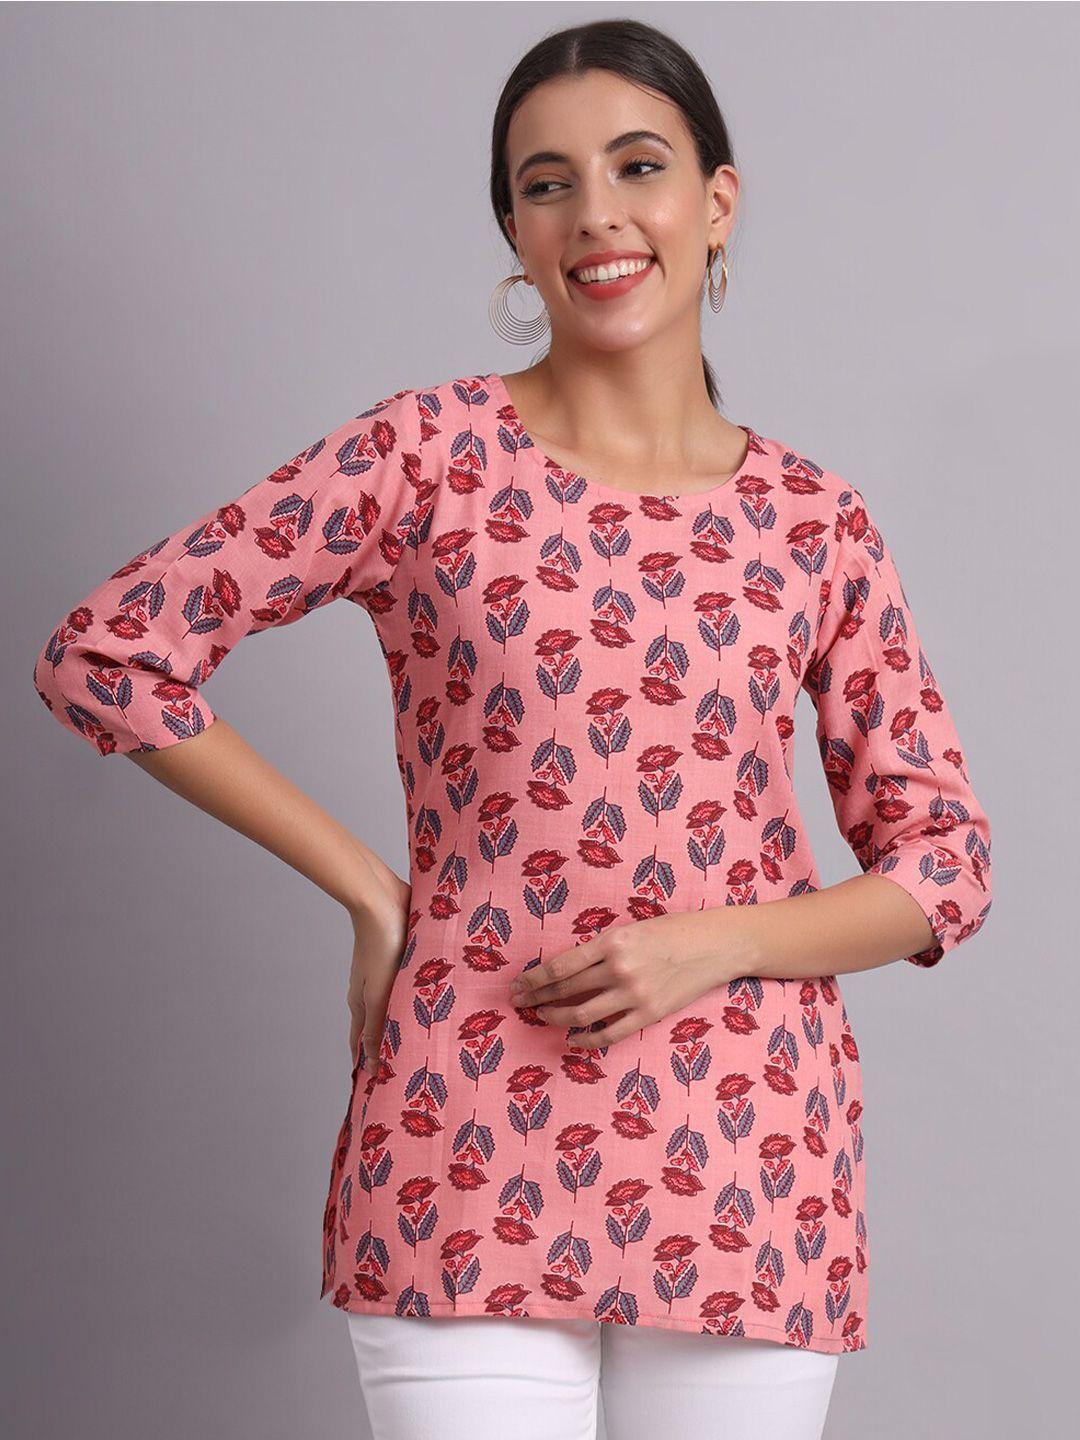 baesd pink & candlelight peach floral printed boat neck kurti